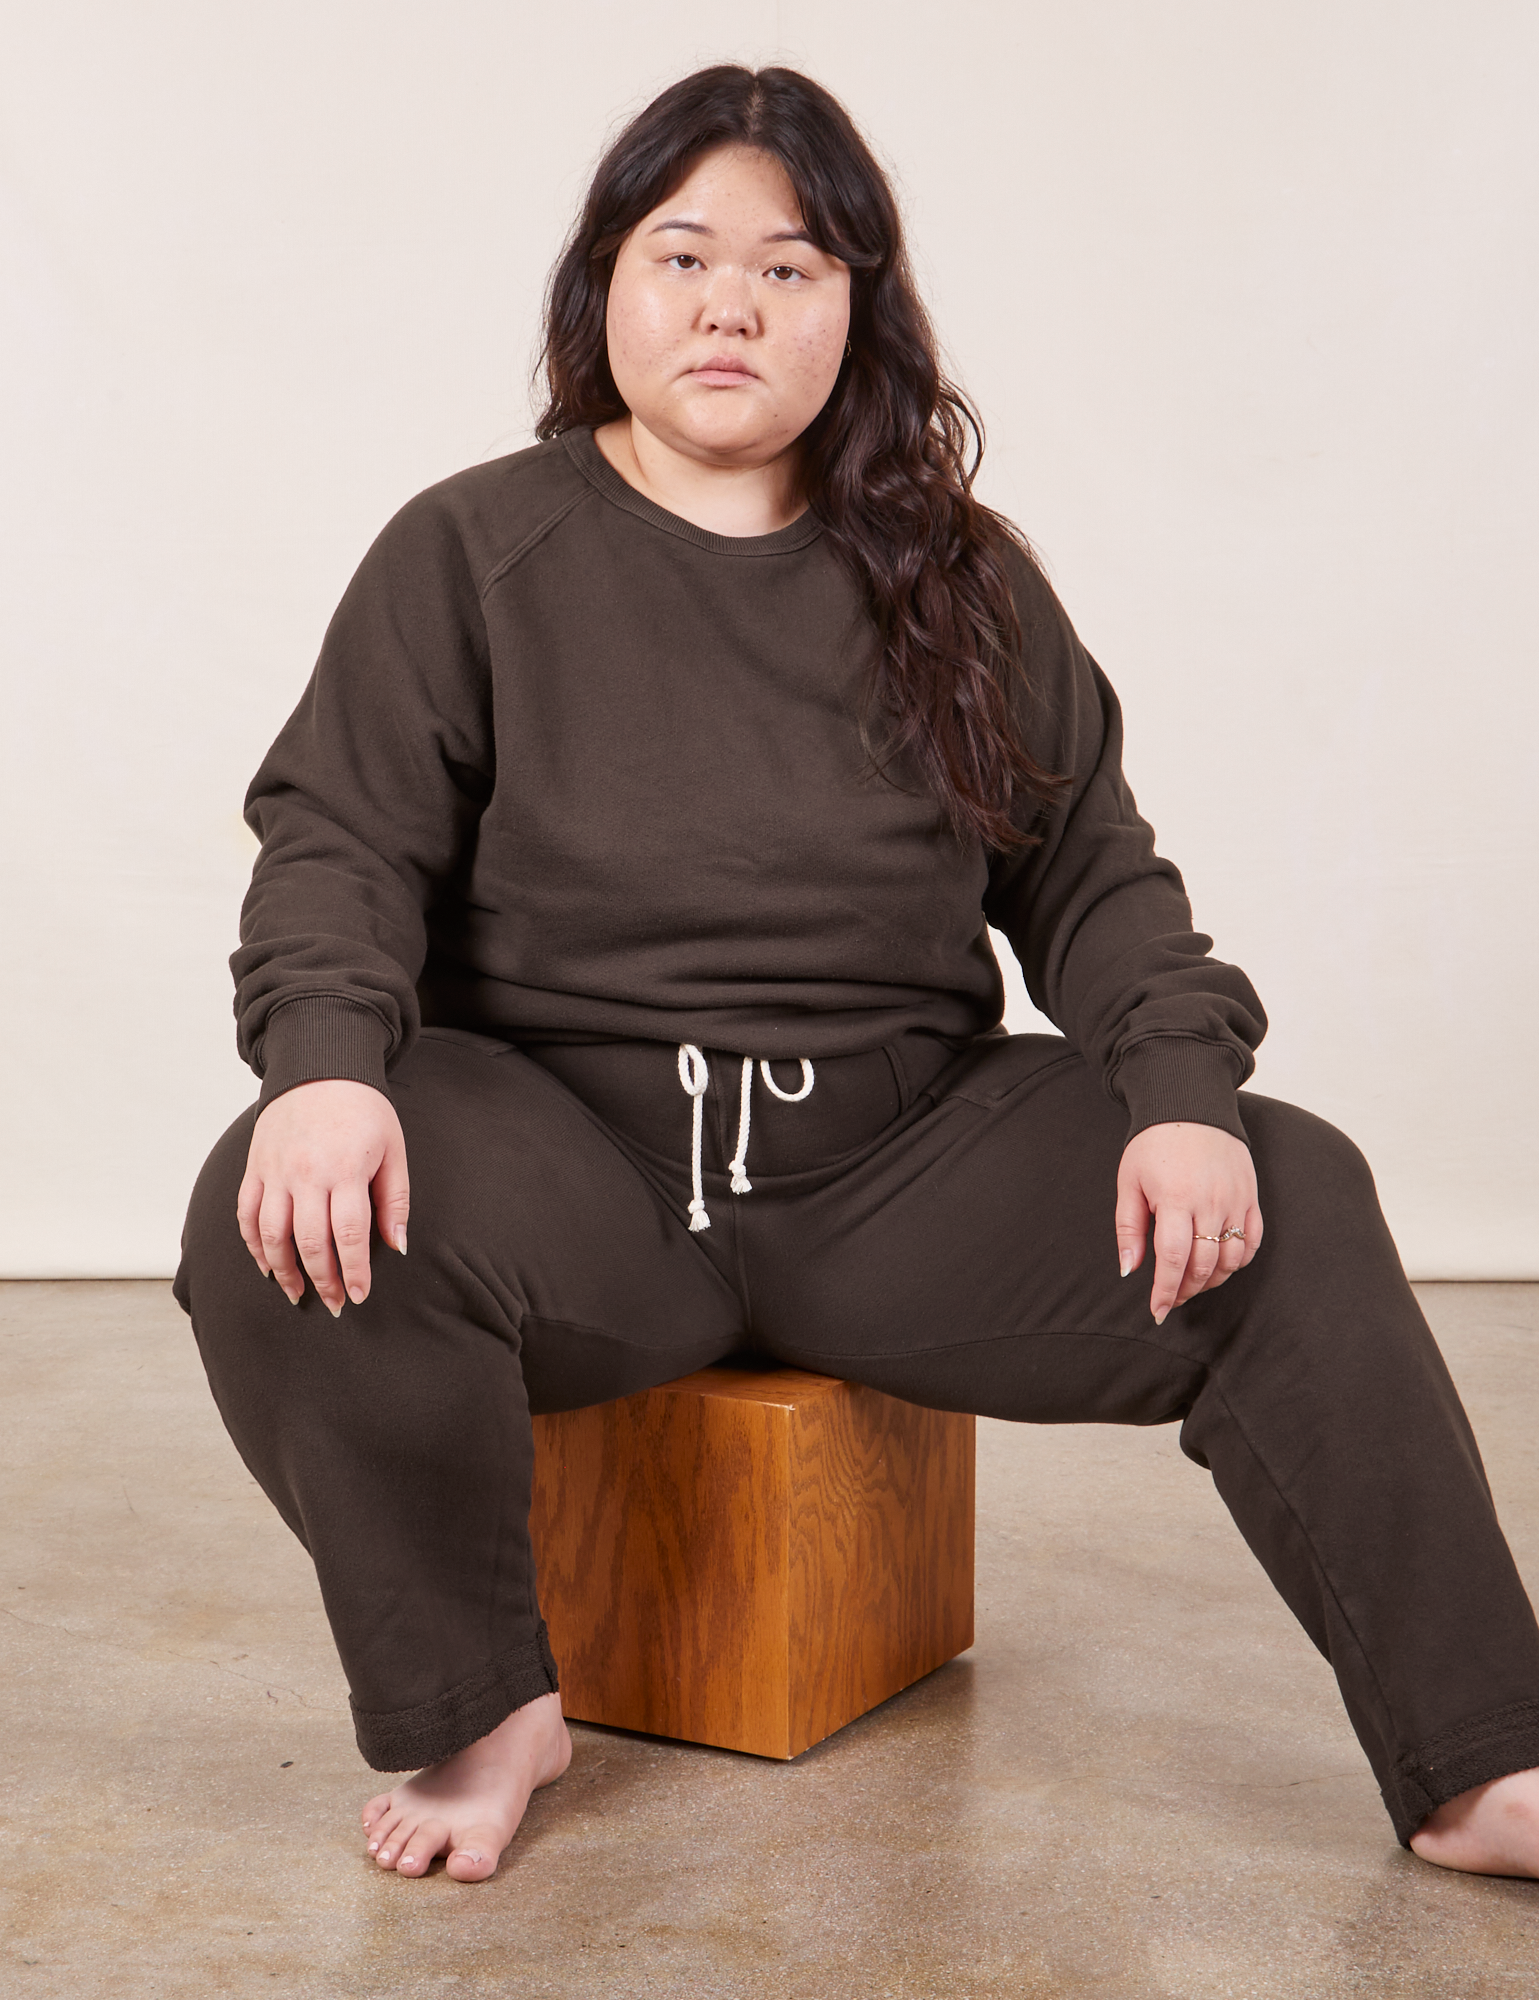 Ashley is wearing Heavyweight Crew in Espresso Brown and Cropped Rolled Cuff Sweatpants